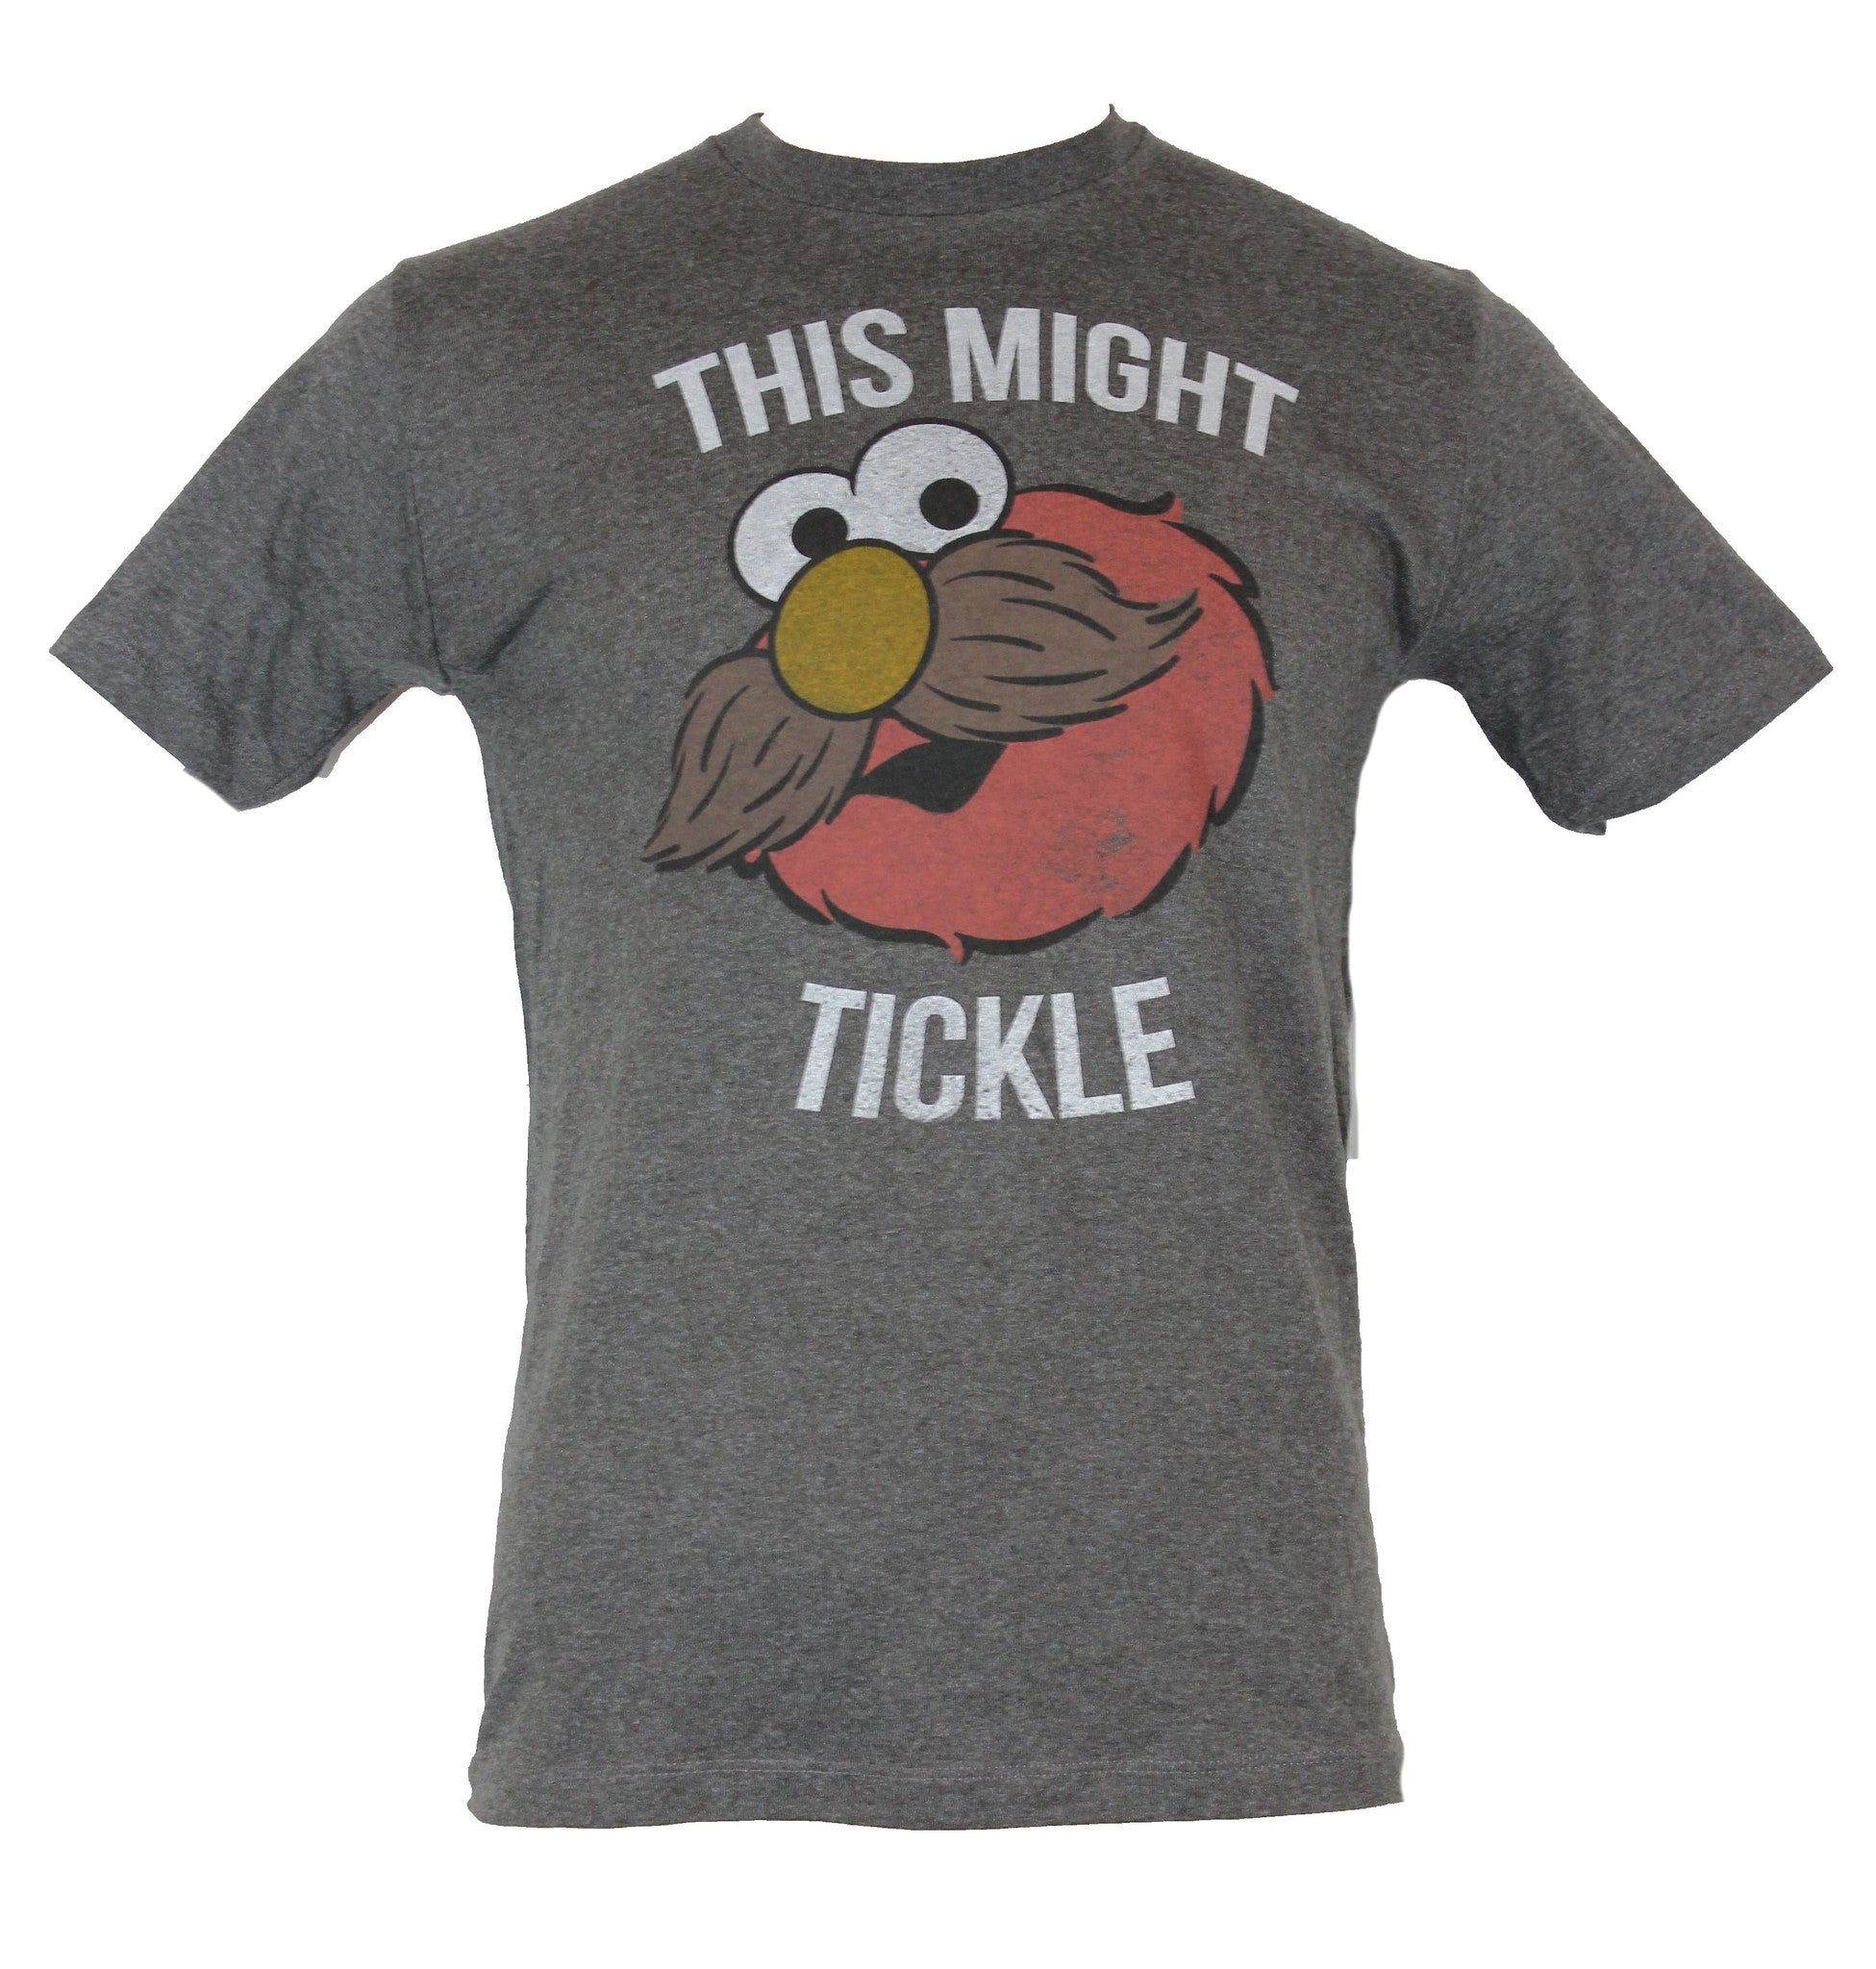 Sesame Street Mens T-Shirt -  "This Might Tickle" Elmo with Mustache Image - Inmyparentsbasement.com